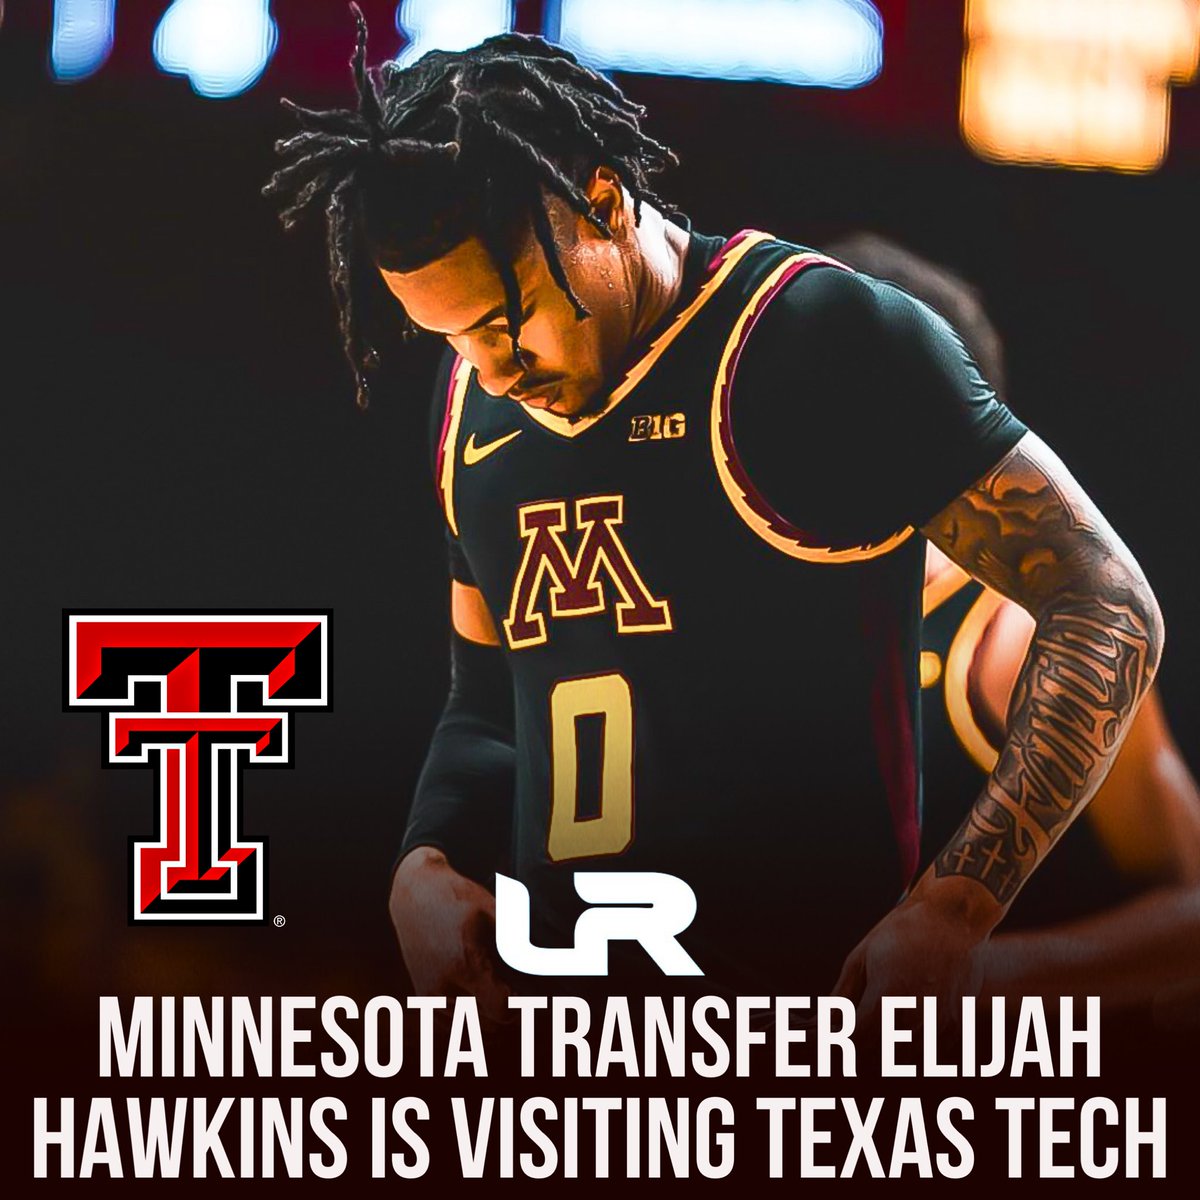 NEWS: Minnesota transfer Elijah Hawkins is taking a visit to Texas Tech this weekend, a source tells @LeagueRDY. Hawkins began his career playing two seasons at Howard before spending last season at Minnesota. He’s a native of Washington, DC. He averaged 9.5PPG, 7.5APG, 3.6RPG…